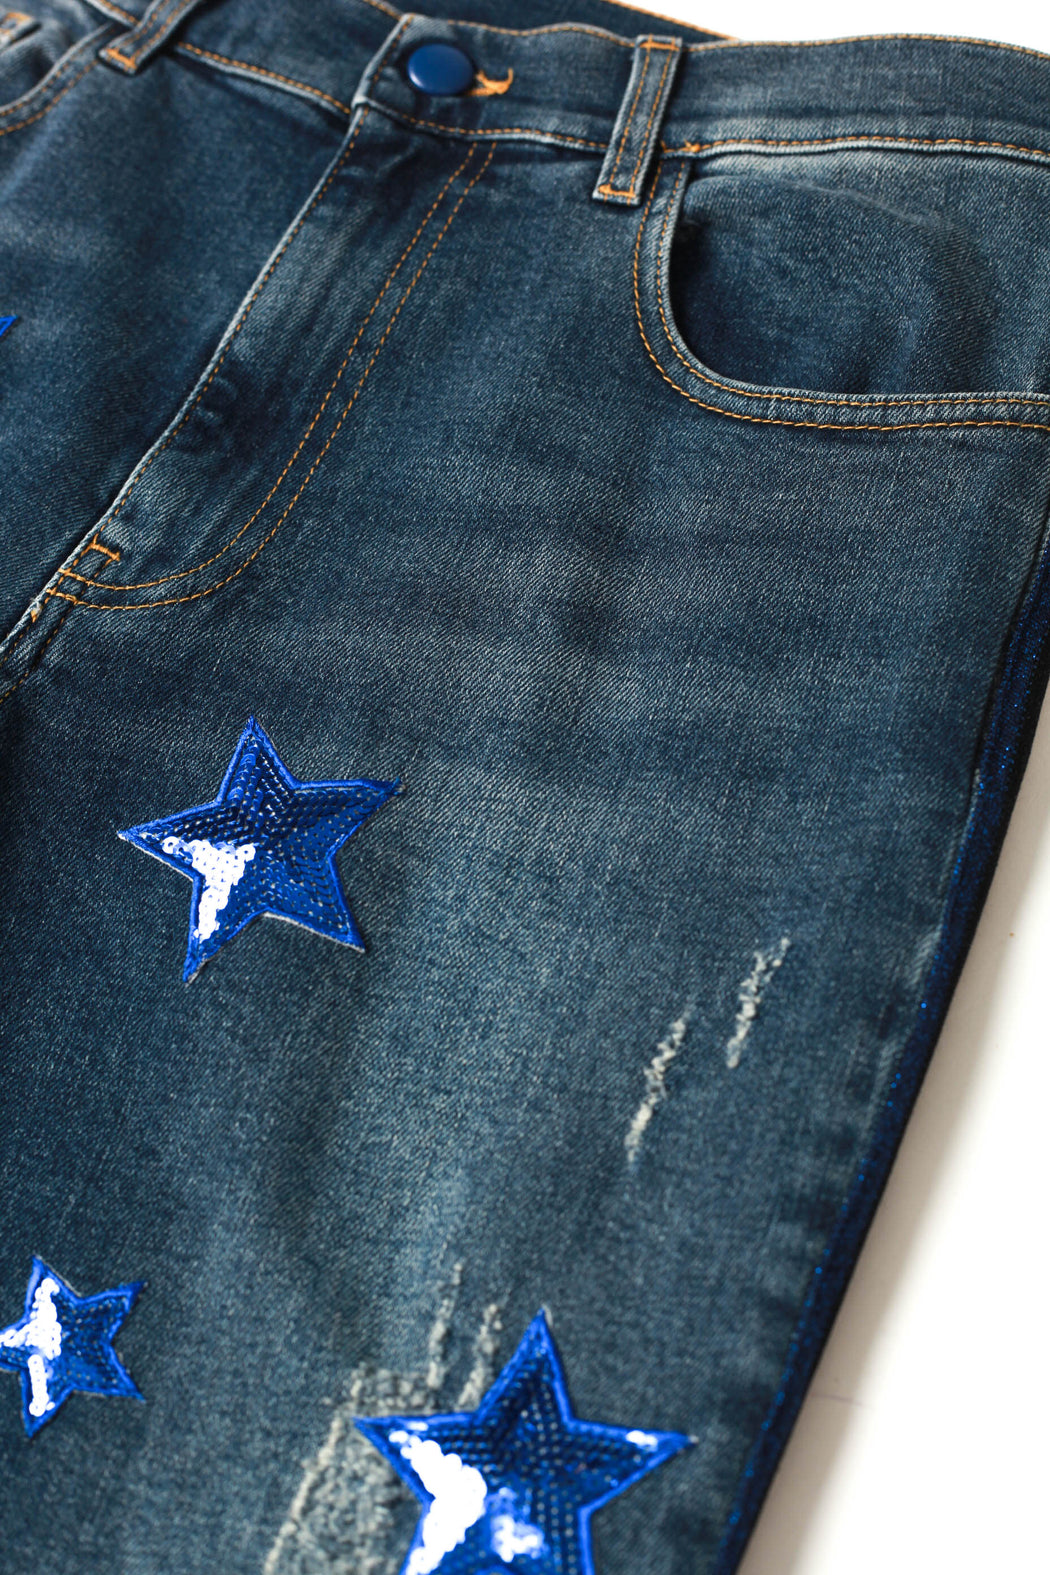 Star Jeans Patch Set of 2, Star Patch, Iron-on Patch Children/Adults,  Trouser Patch